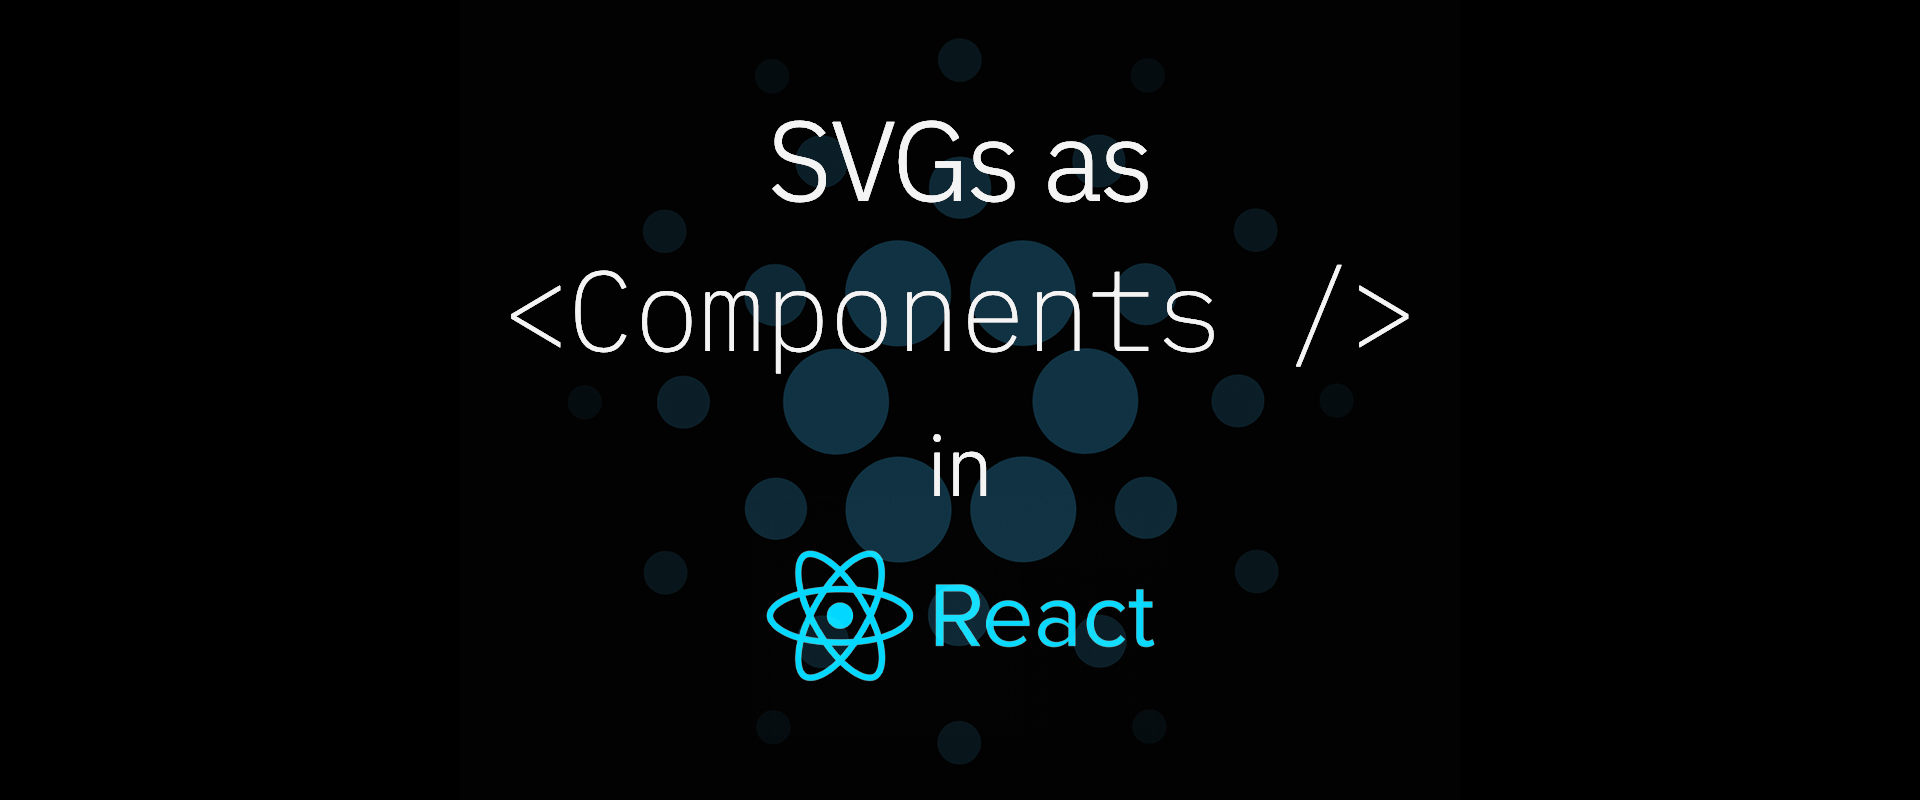 SVGs as Components in React